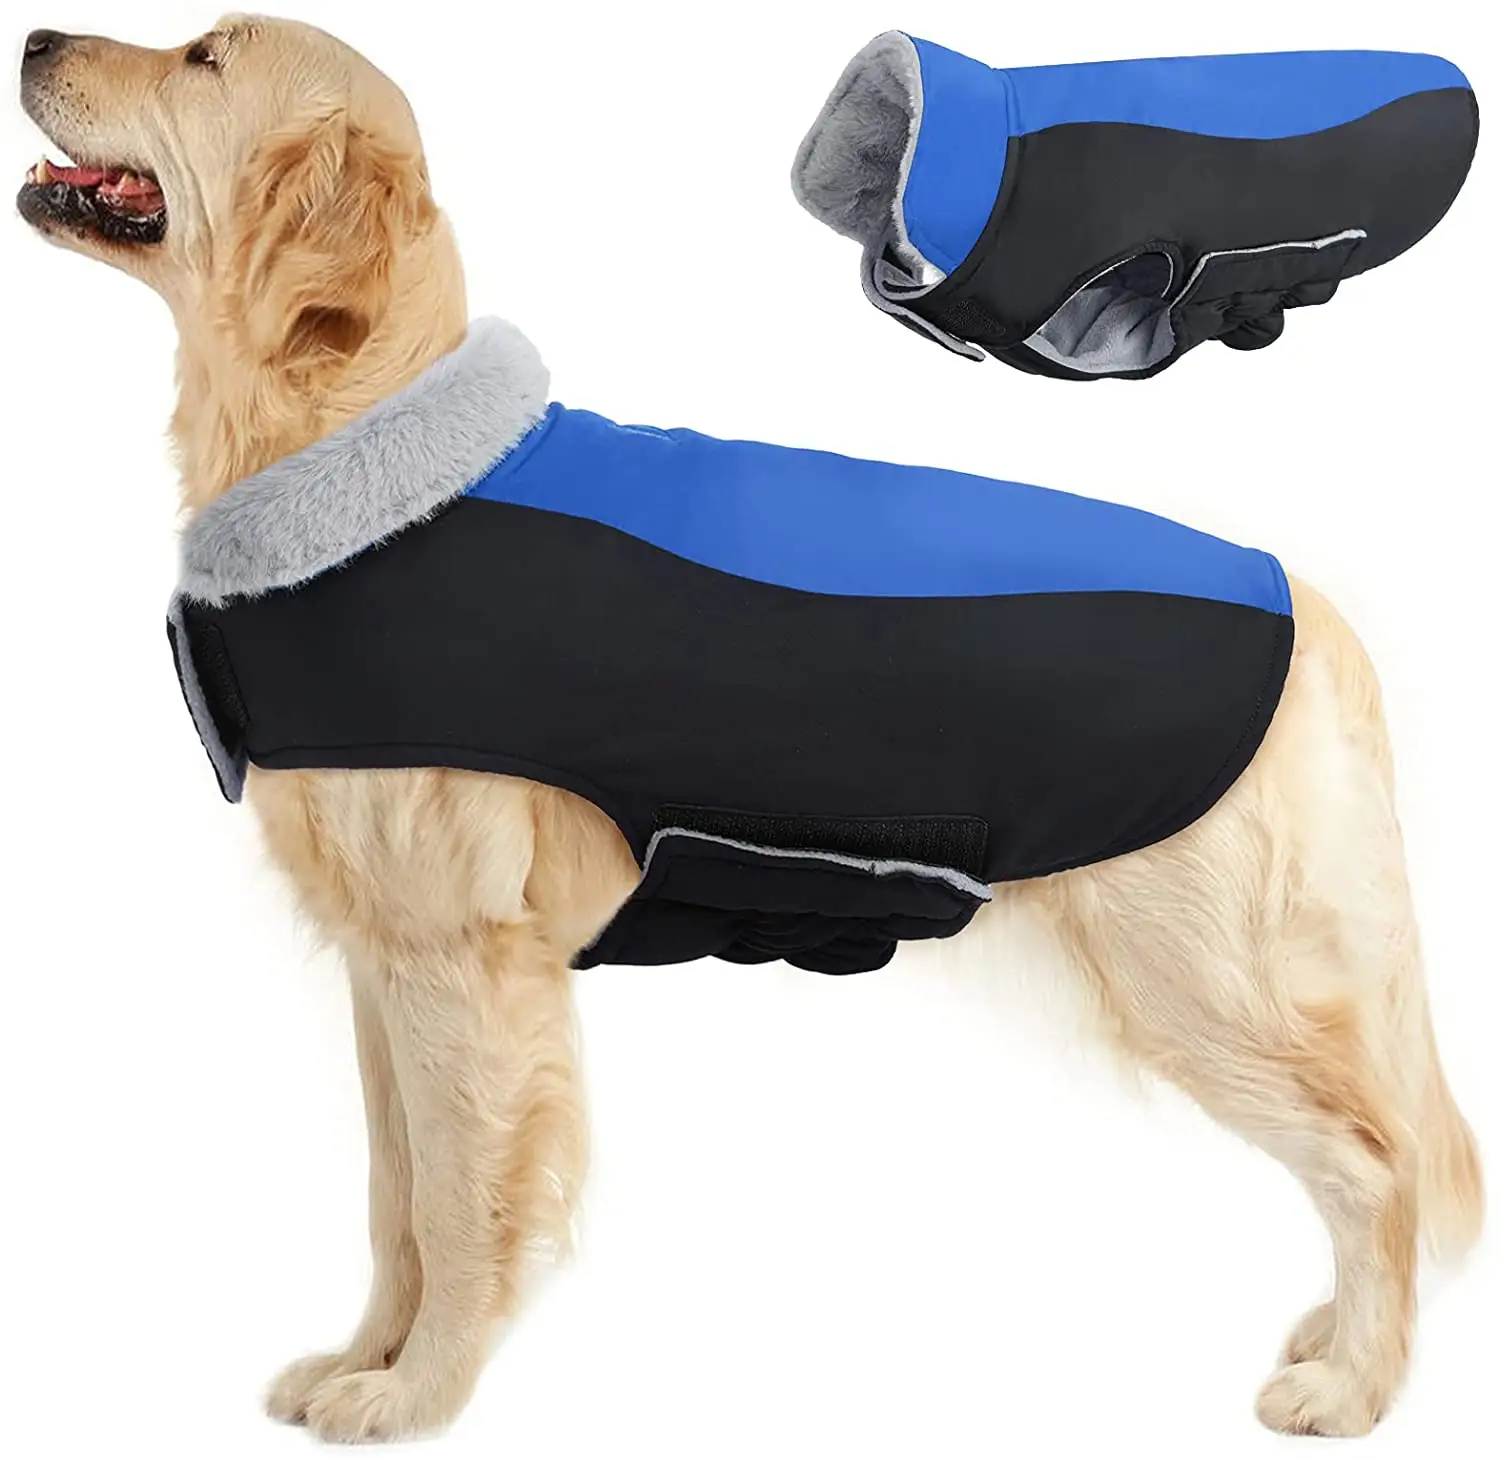 Winter Coat with Fur Collar Waterproof Puppy Warm Jacket Cost Dog Cold Weather Vest